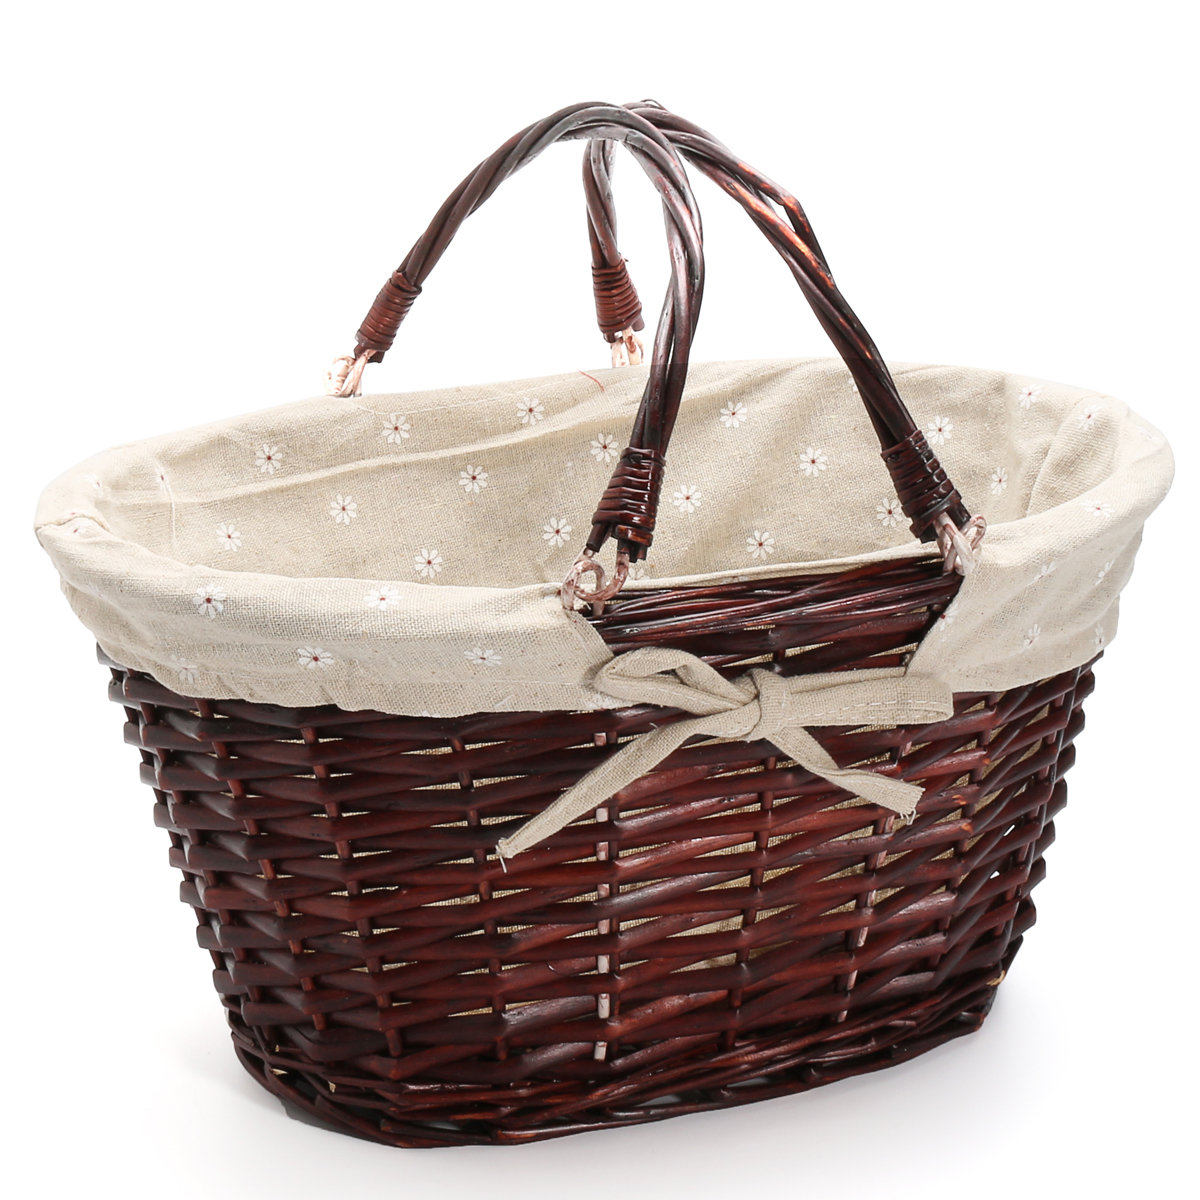 

Oval Wicker Baskets Hamper Storage Picnic Shopping Storage Containerst With Handles